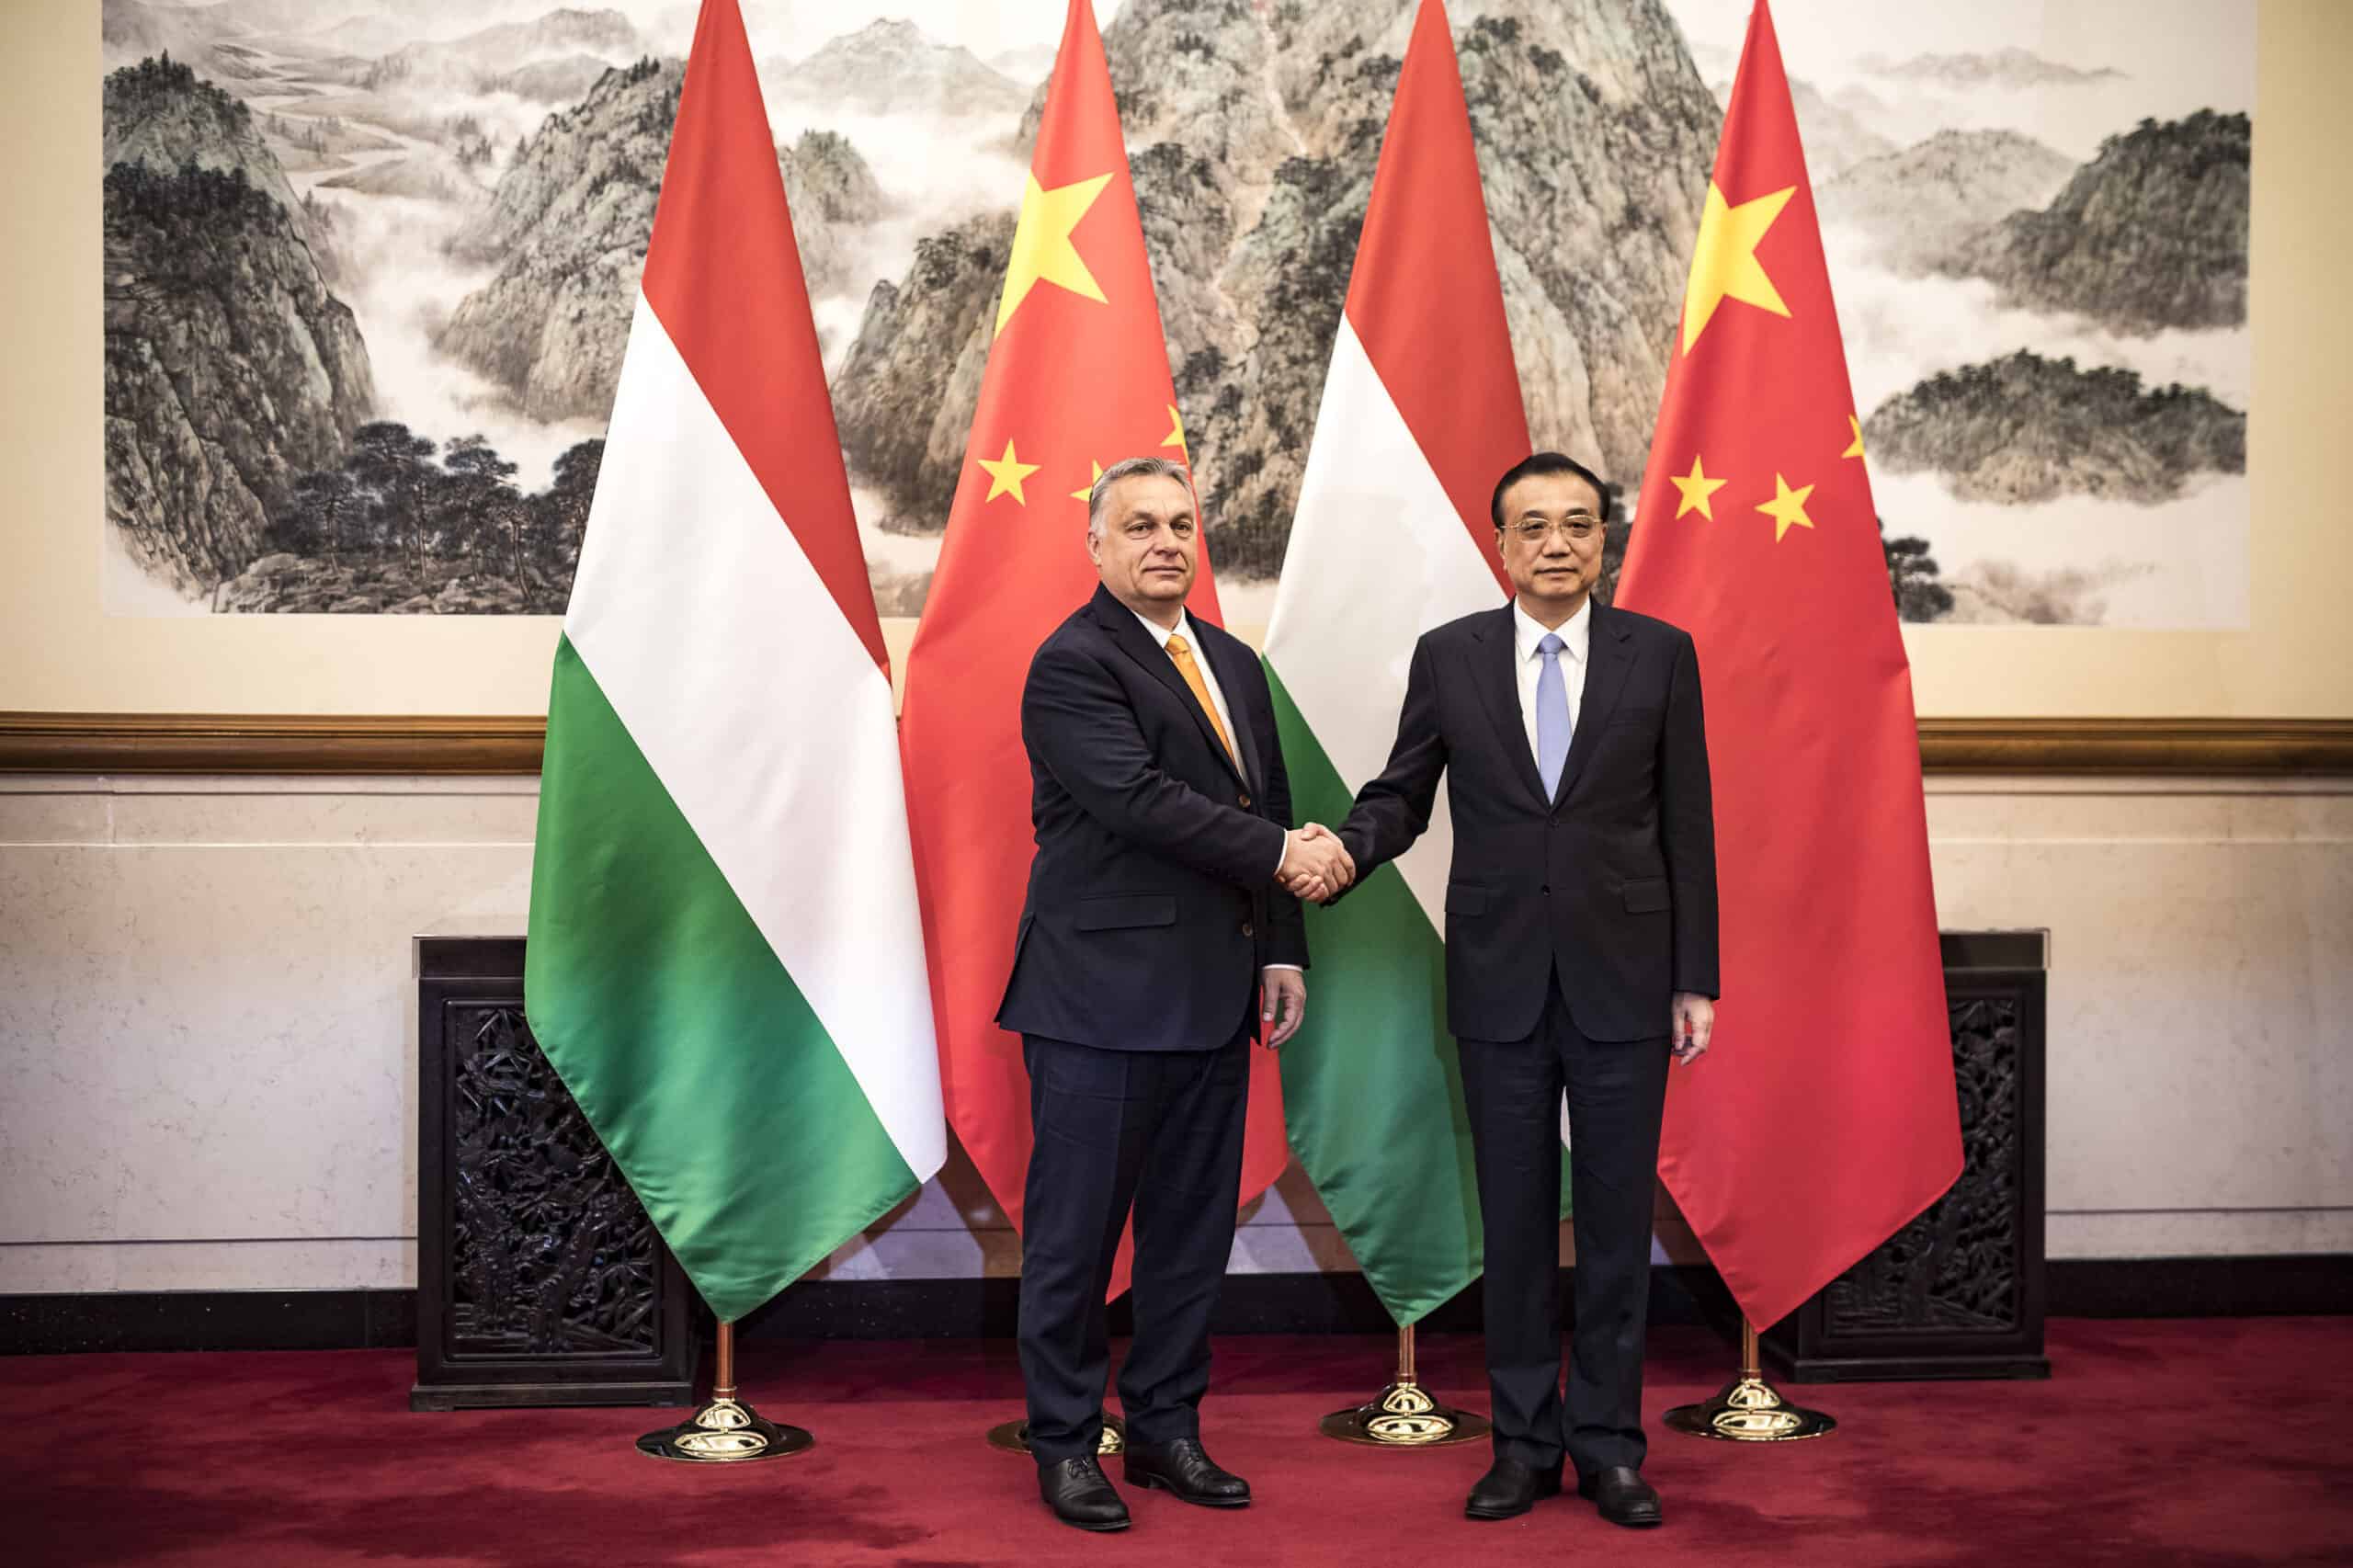 Chinese Influence in Hungary: a multifaceted relationship